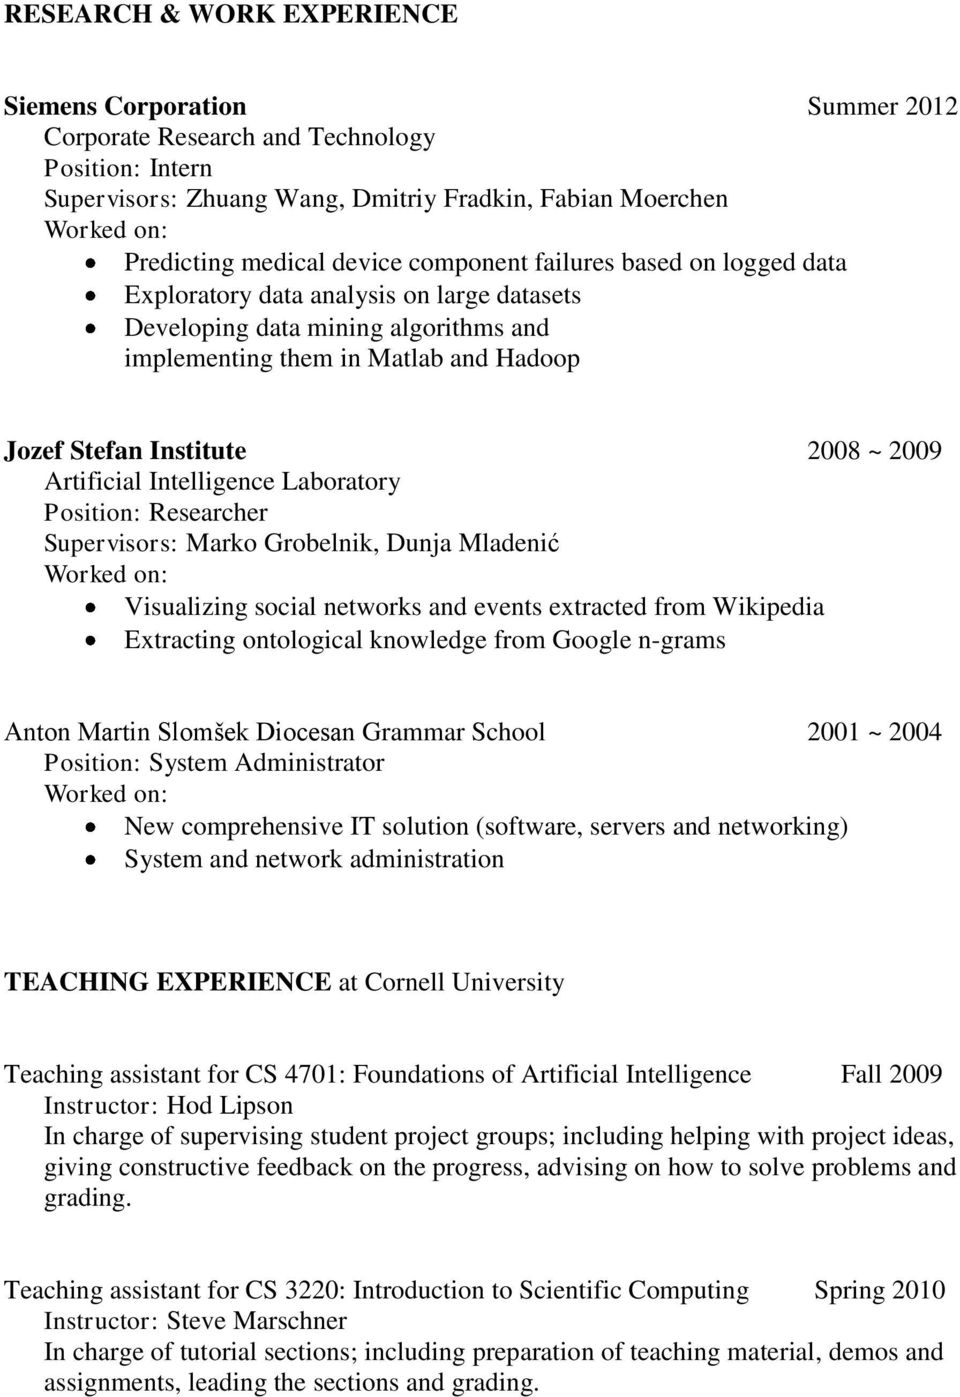 Artificial Intelligence Laboratory Position: Researcher Supervisors: Marko Grobelnik, Dunja Mladenić Visualizing social networks and events extracted from Wikipedia Extracting ontological knowledge